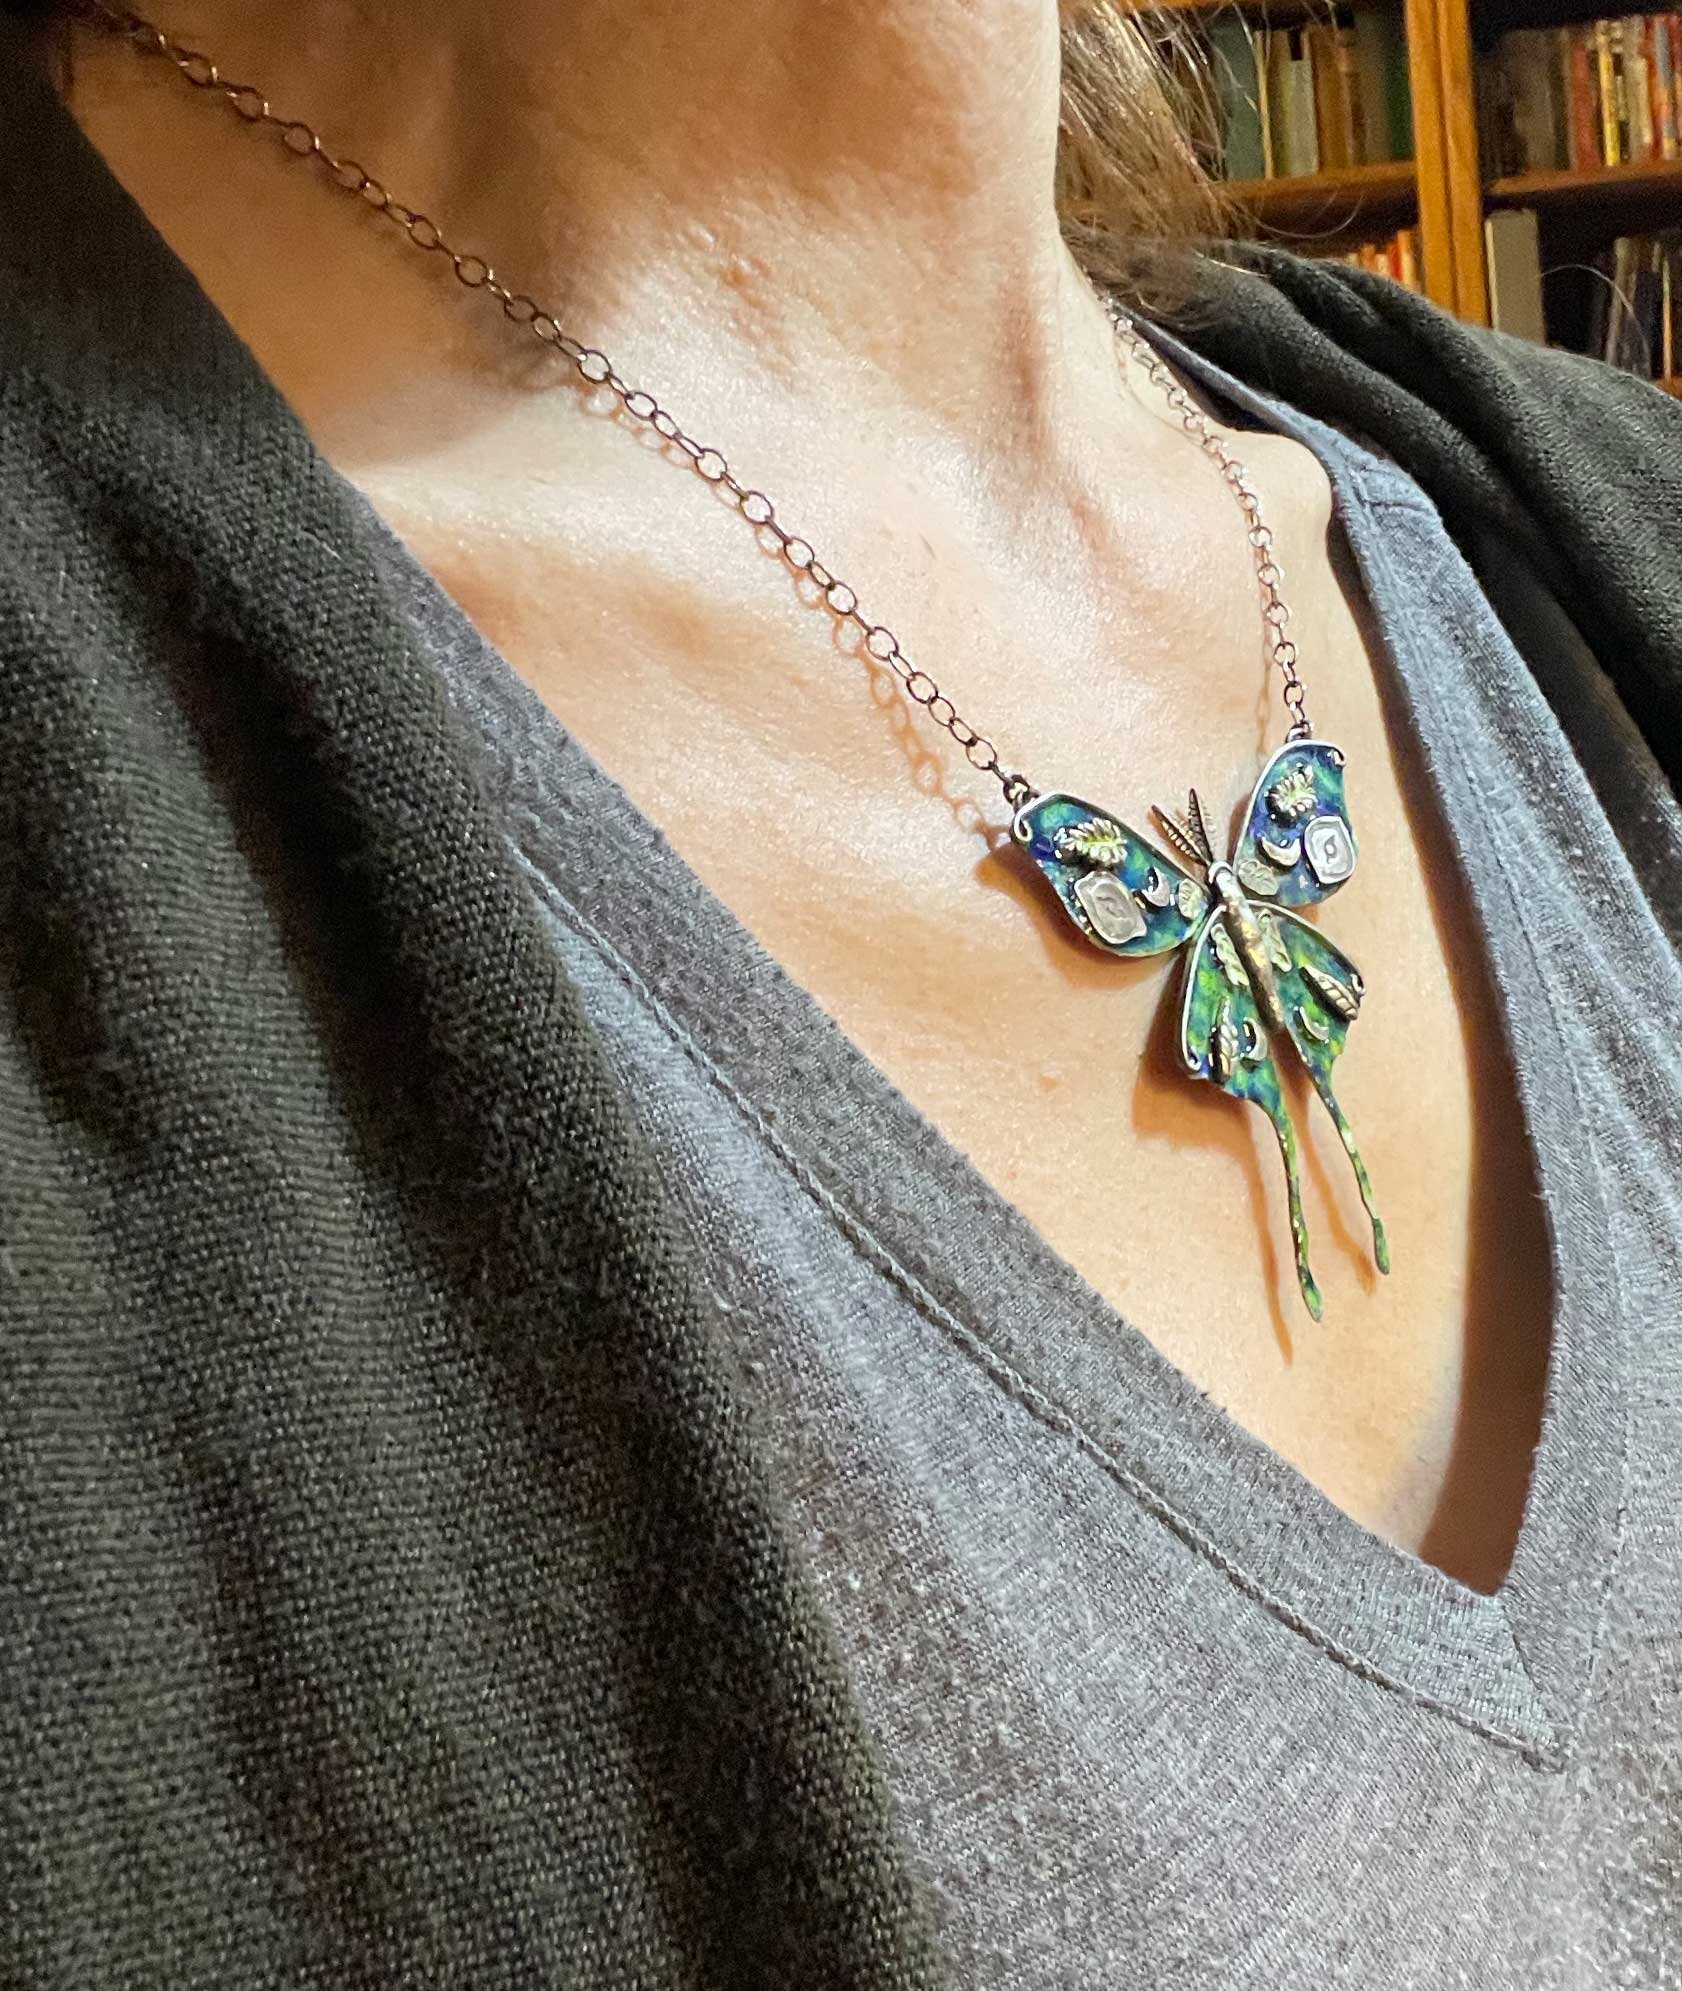 Hand-forged Luna Moth Necklace With Enamel | Etsy